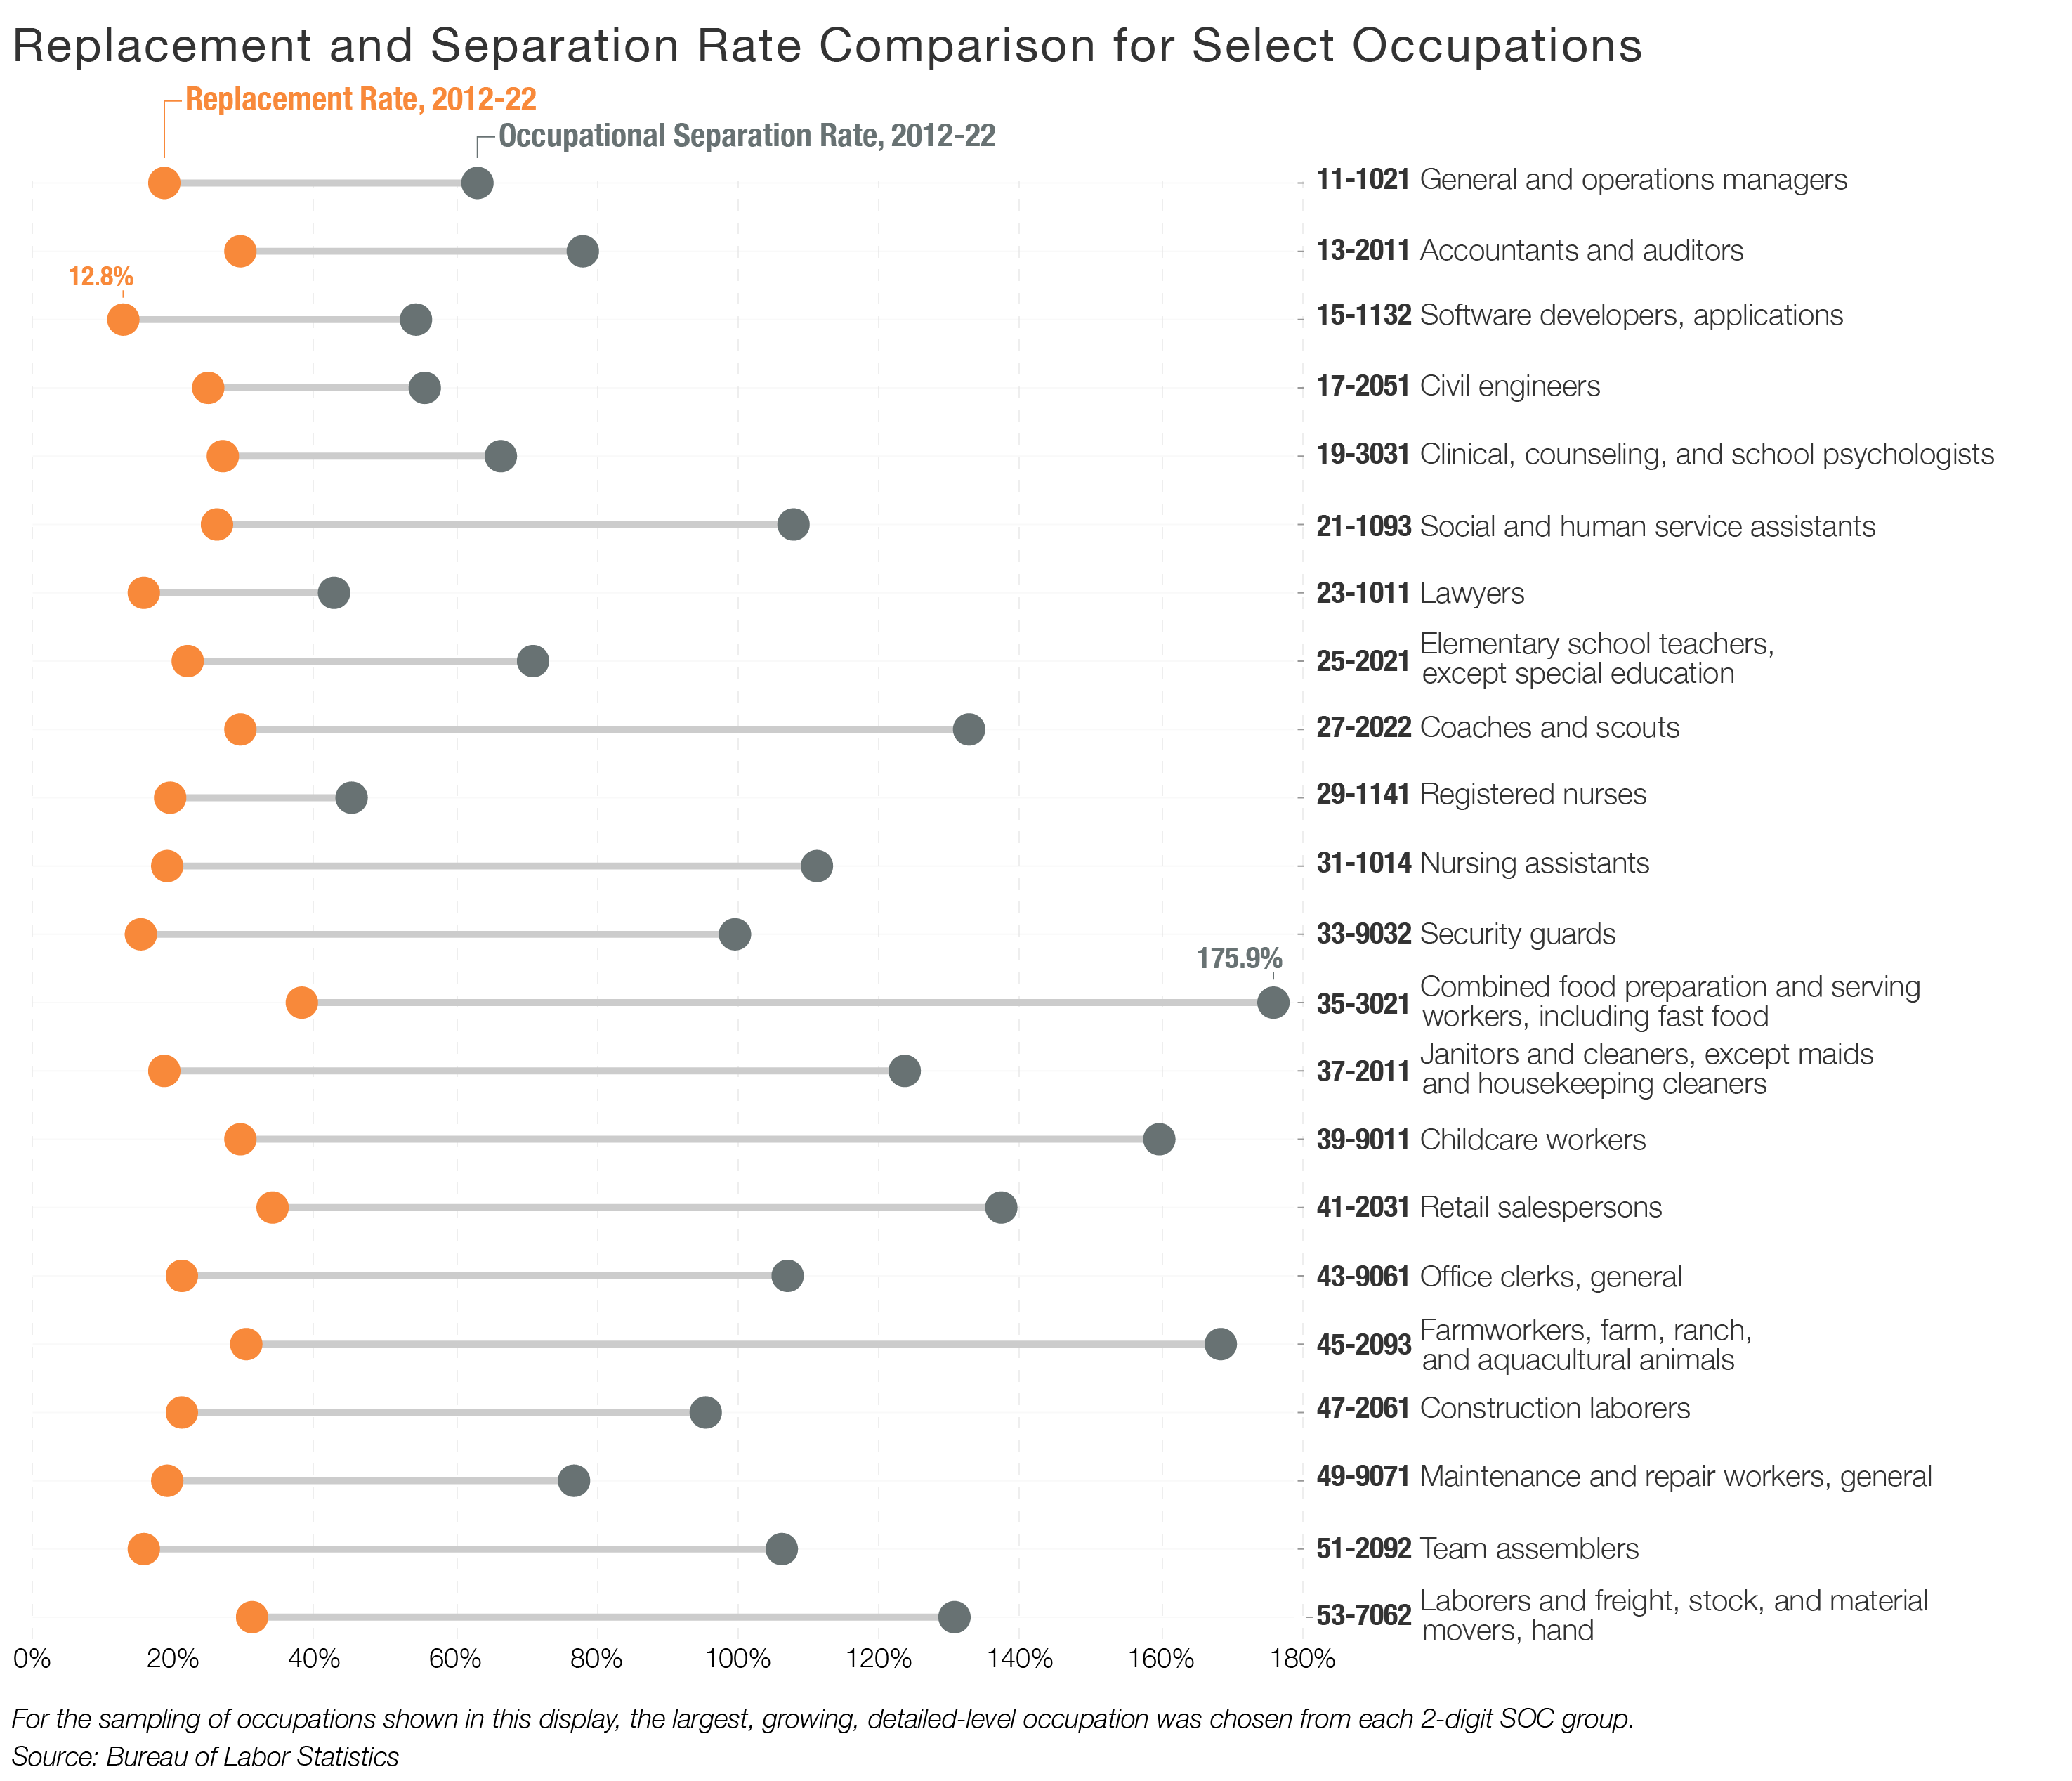 Replacement and Separation Rate Comparison for Select Occupations